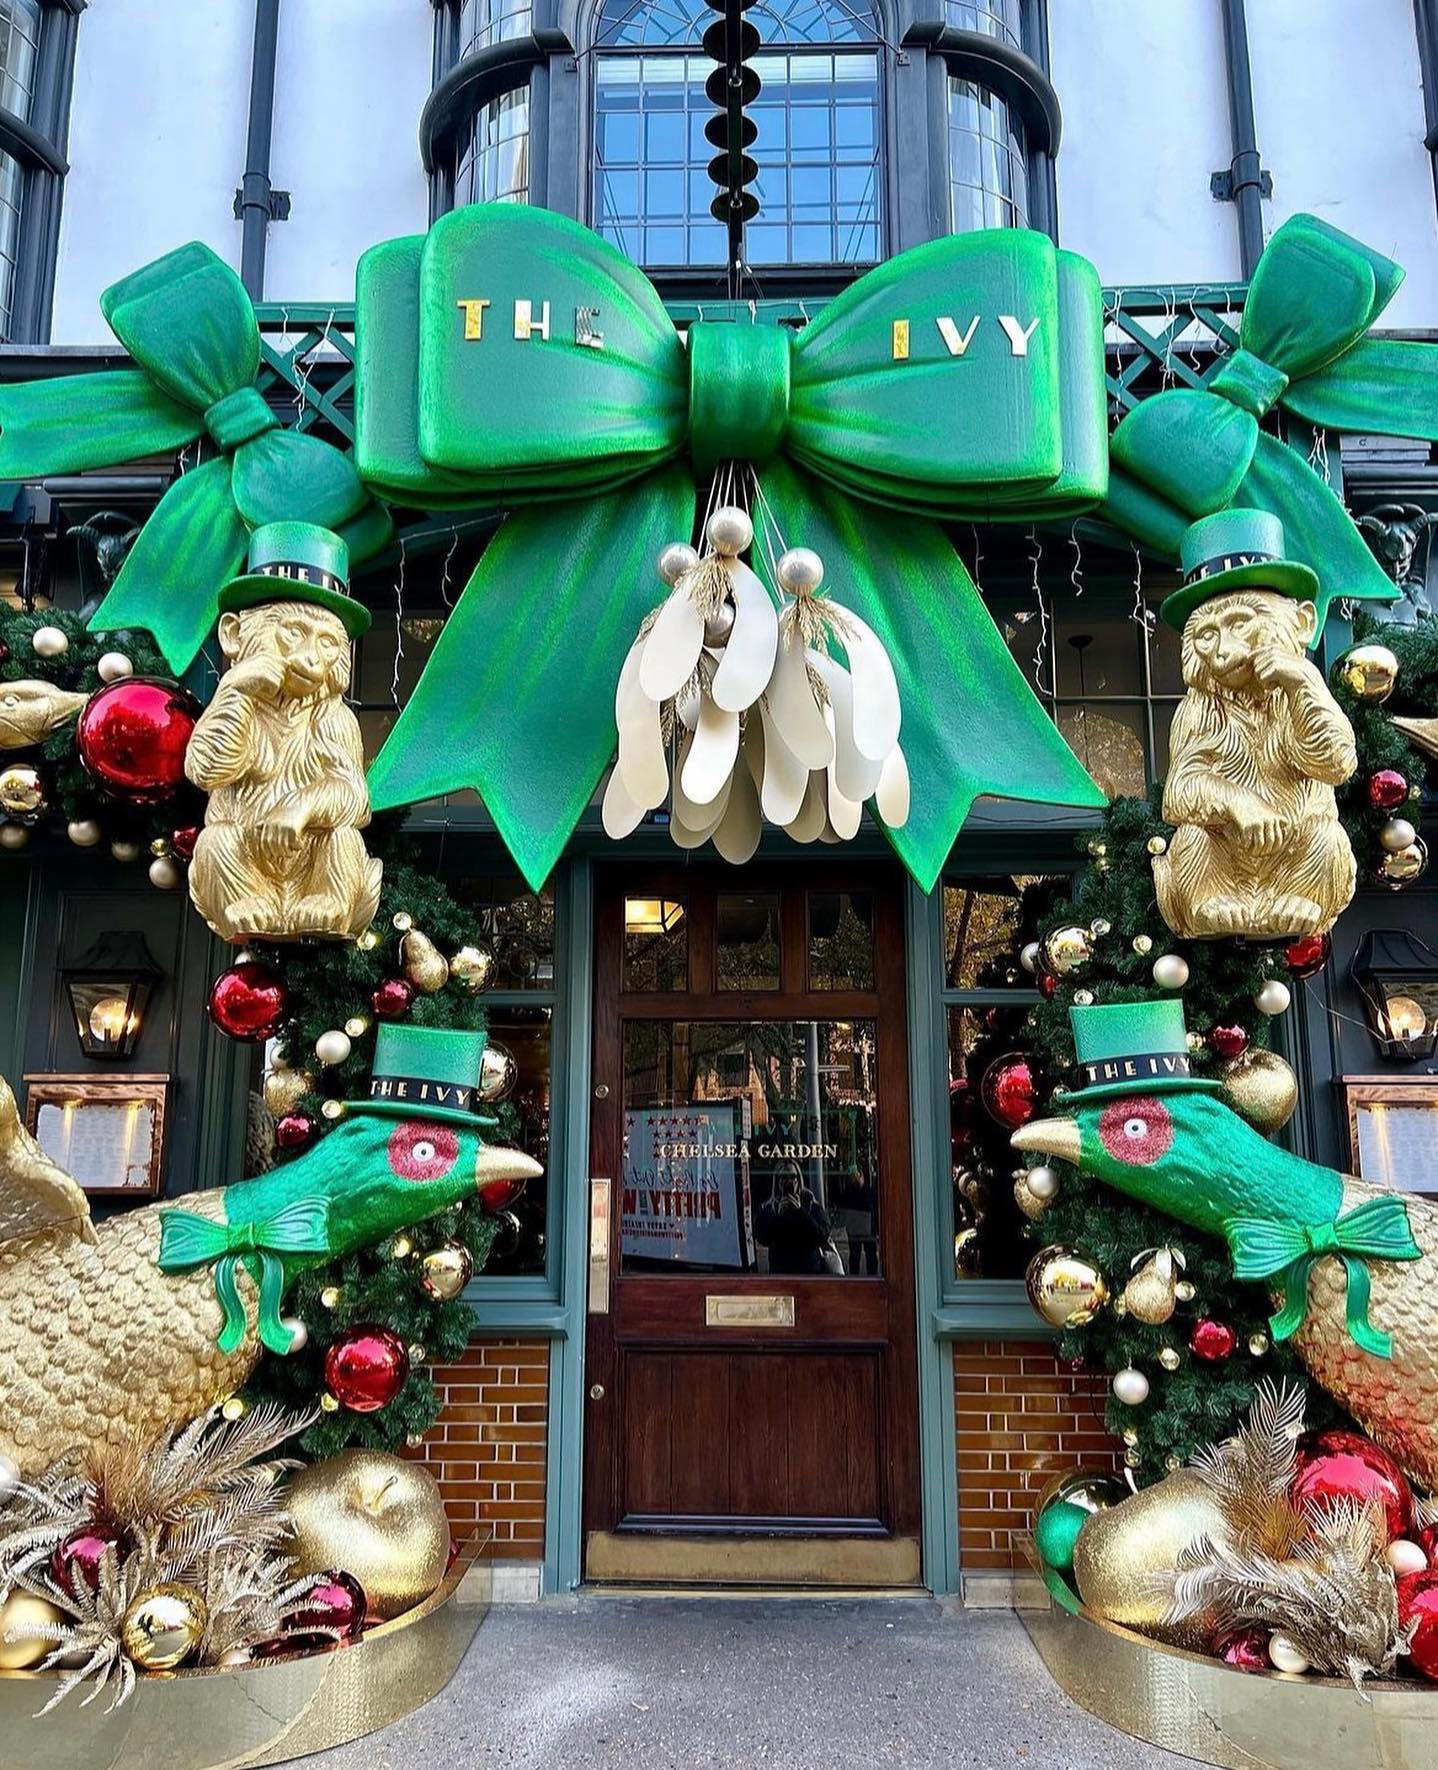 All Things England - Christmas facade on point at #theivychelseagarden